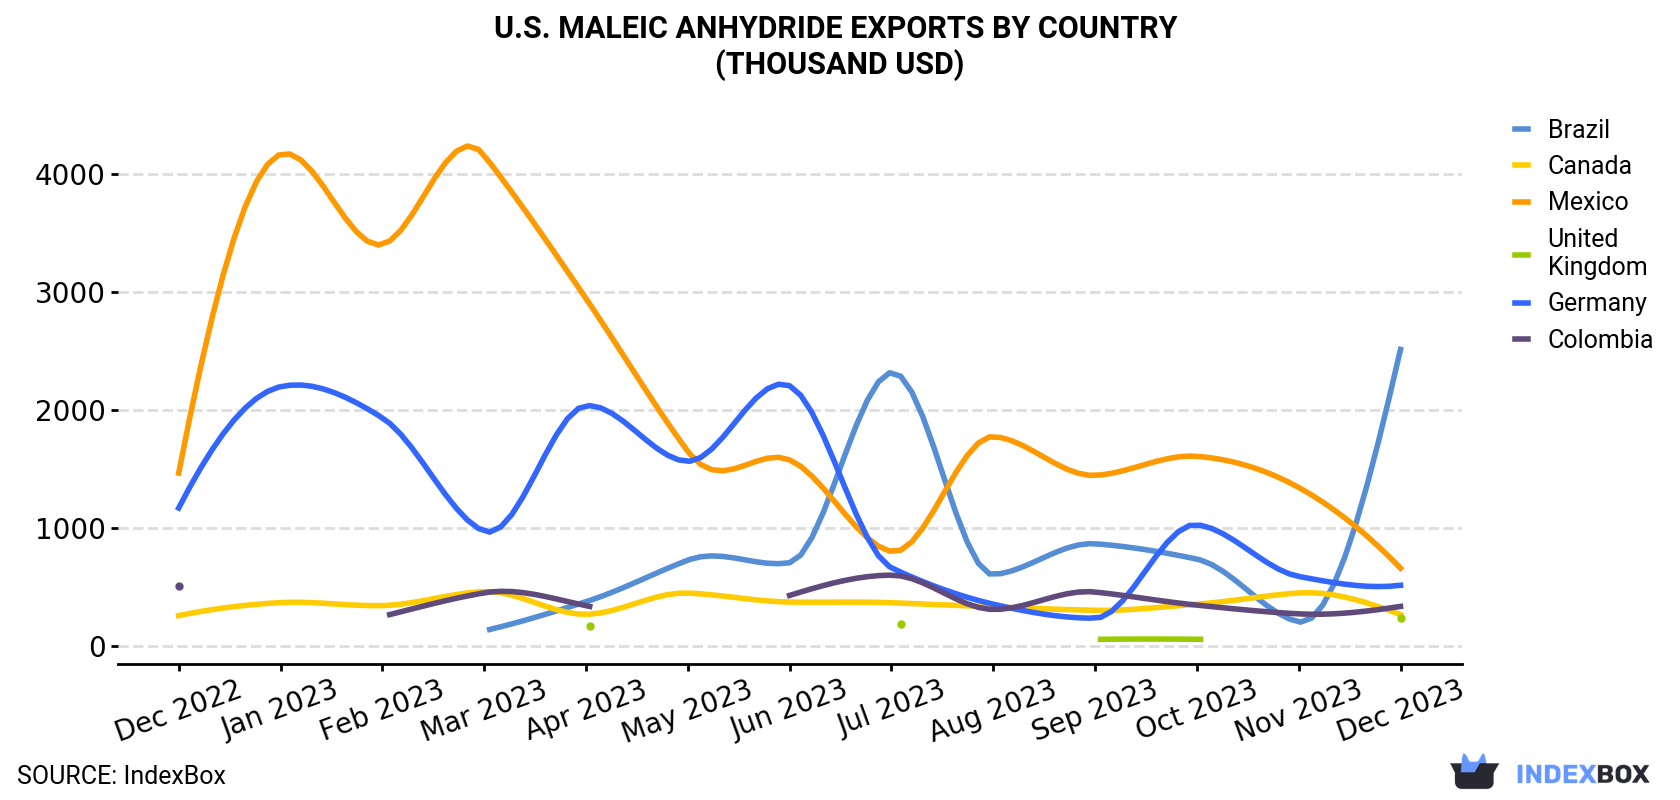 U.S. Maleic Anhydride Exports By Country (Thousand USD)